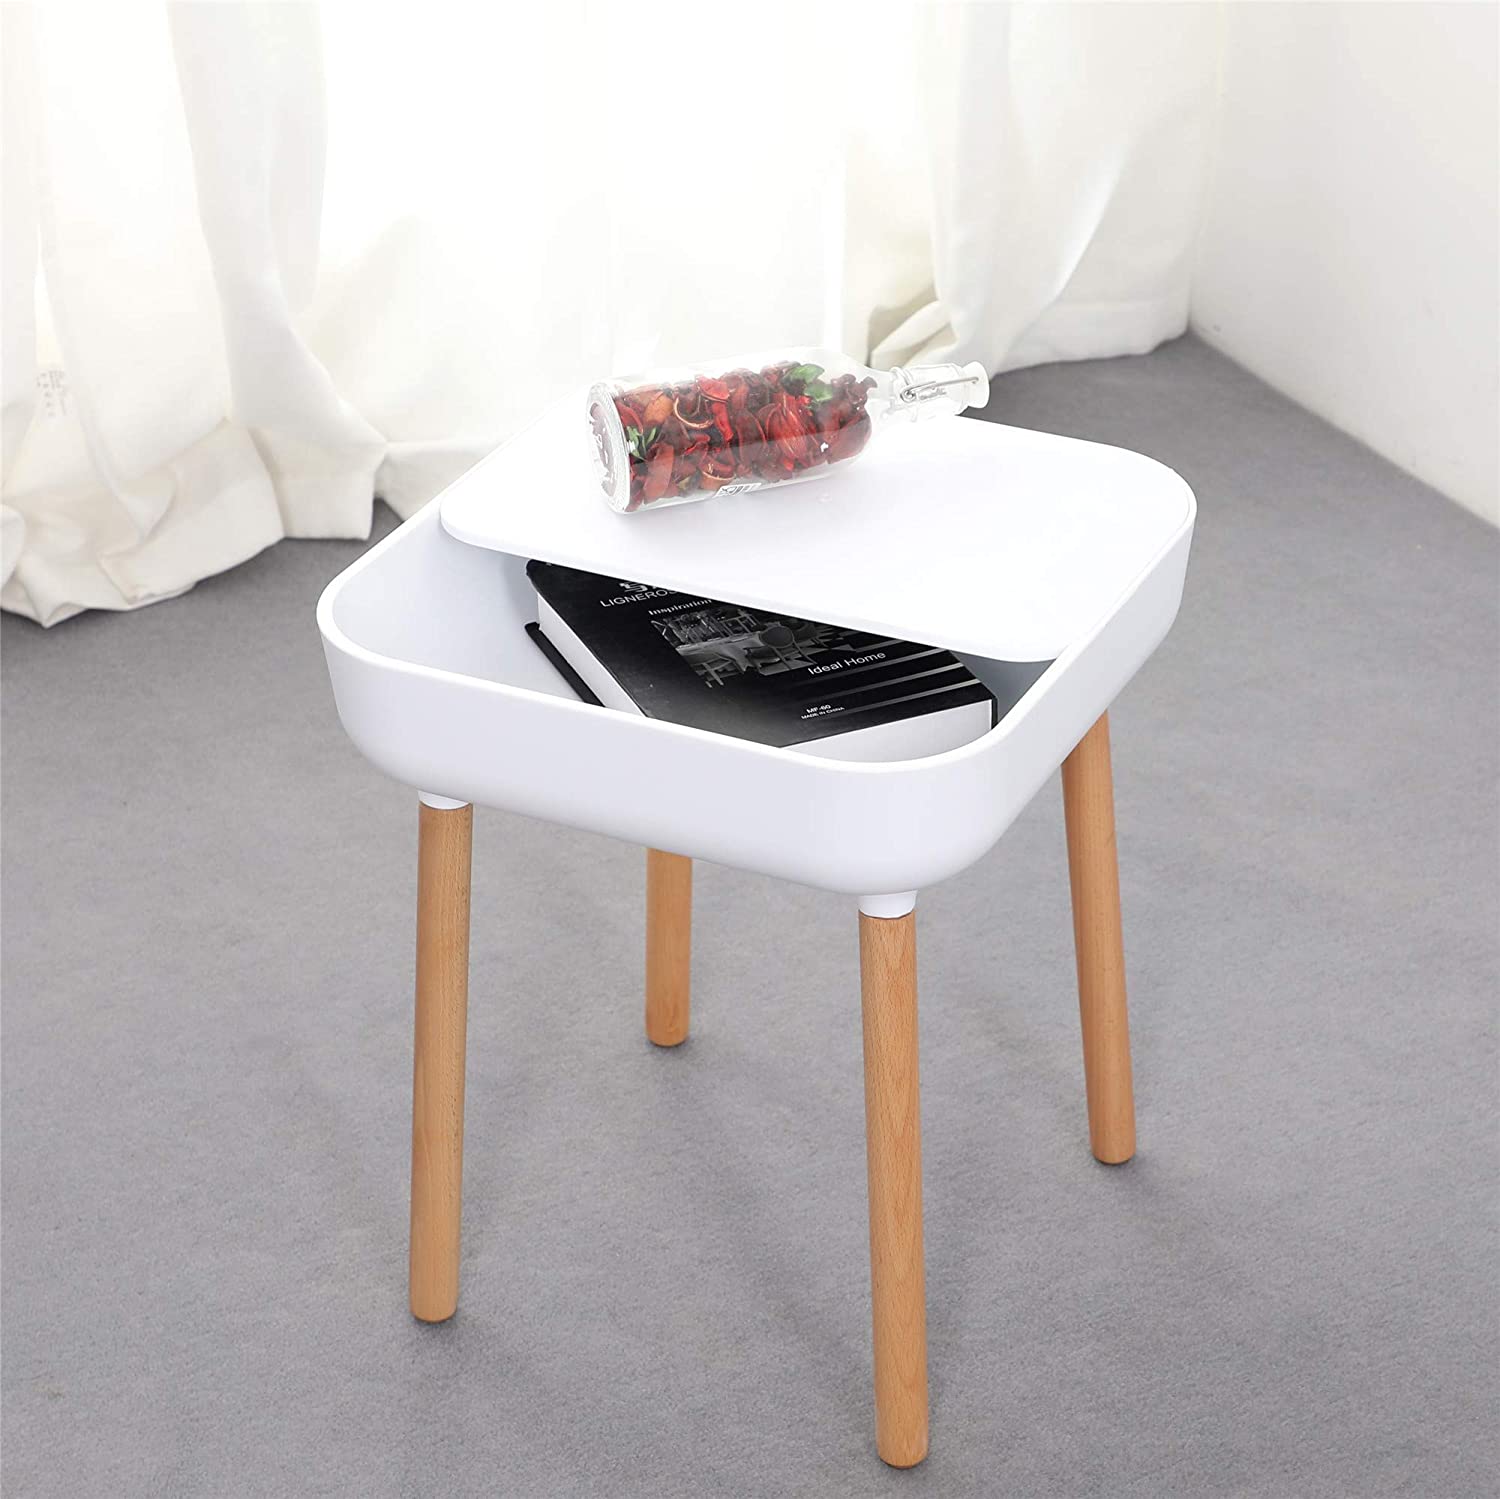 KAI Side Table, Minimalistic Nordic Style bedside table, sofa side table, nightstand, end table with storage unit & beechwood legs for Bedroom, Living Room & office-white